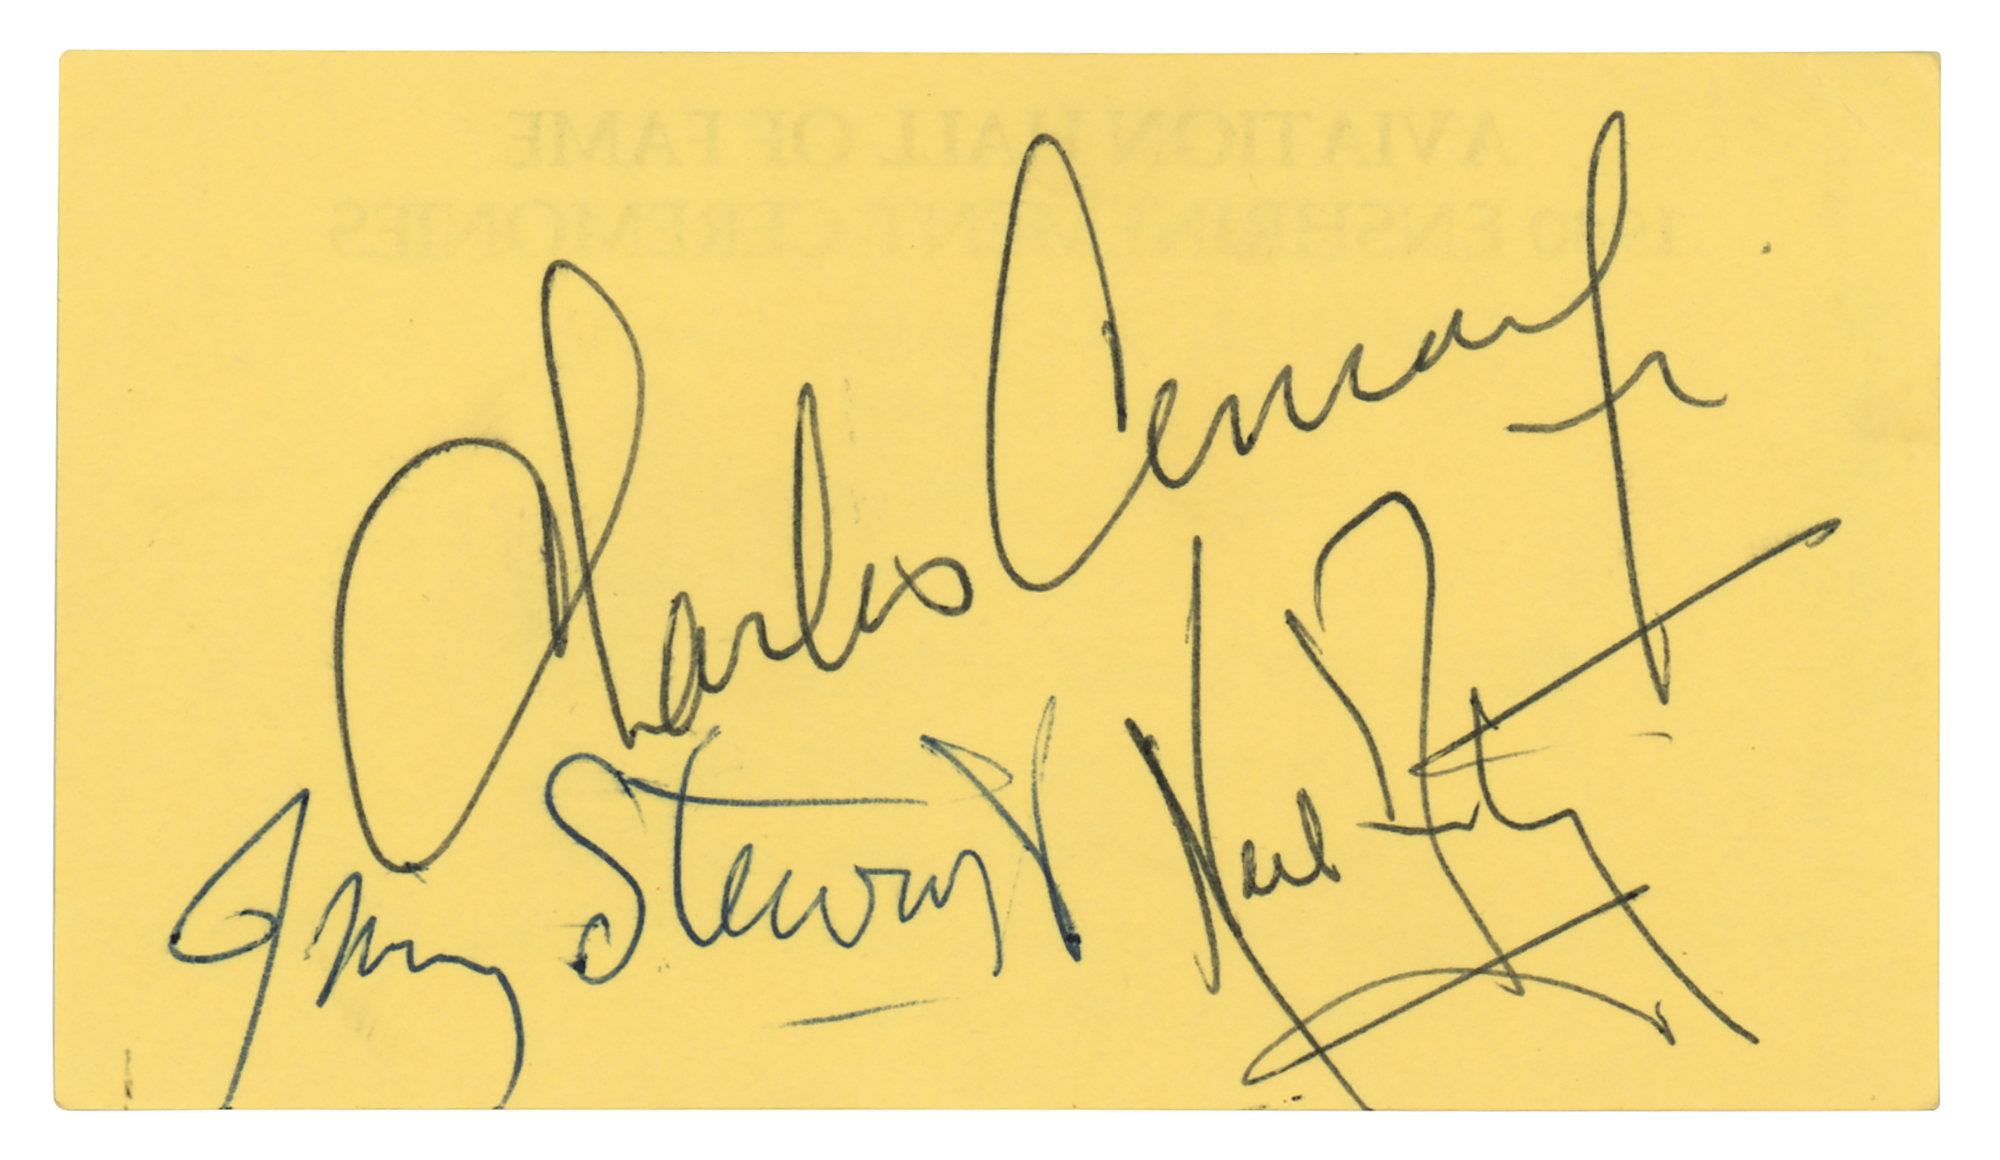 Lot #536 Neil Armstrong, Charles Conrad, and Jimmy Stewart Signed Aviation Hall of Fame Ticket